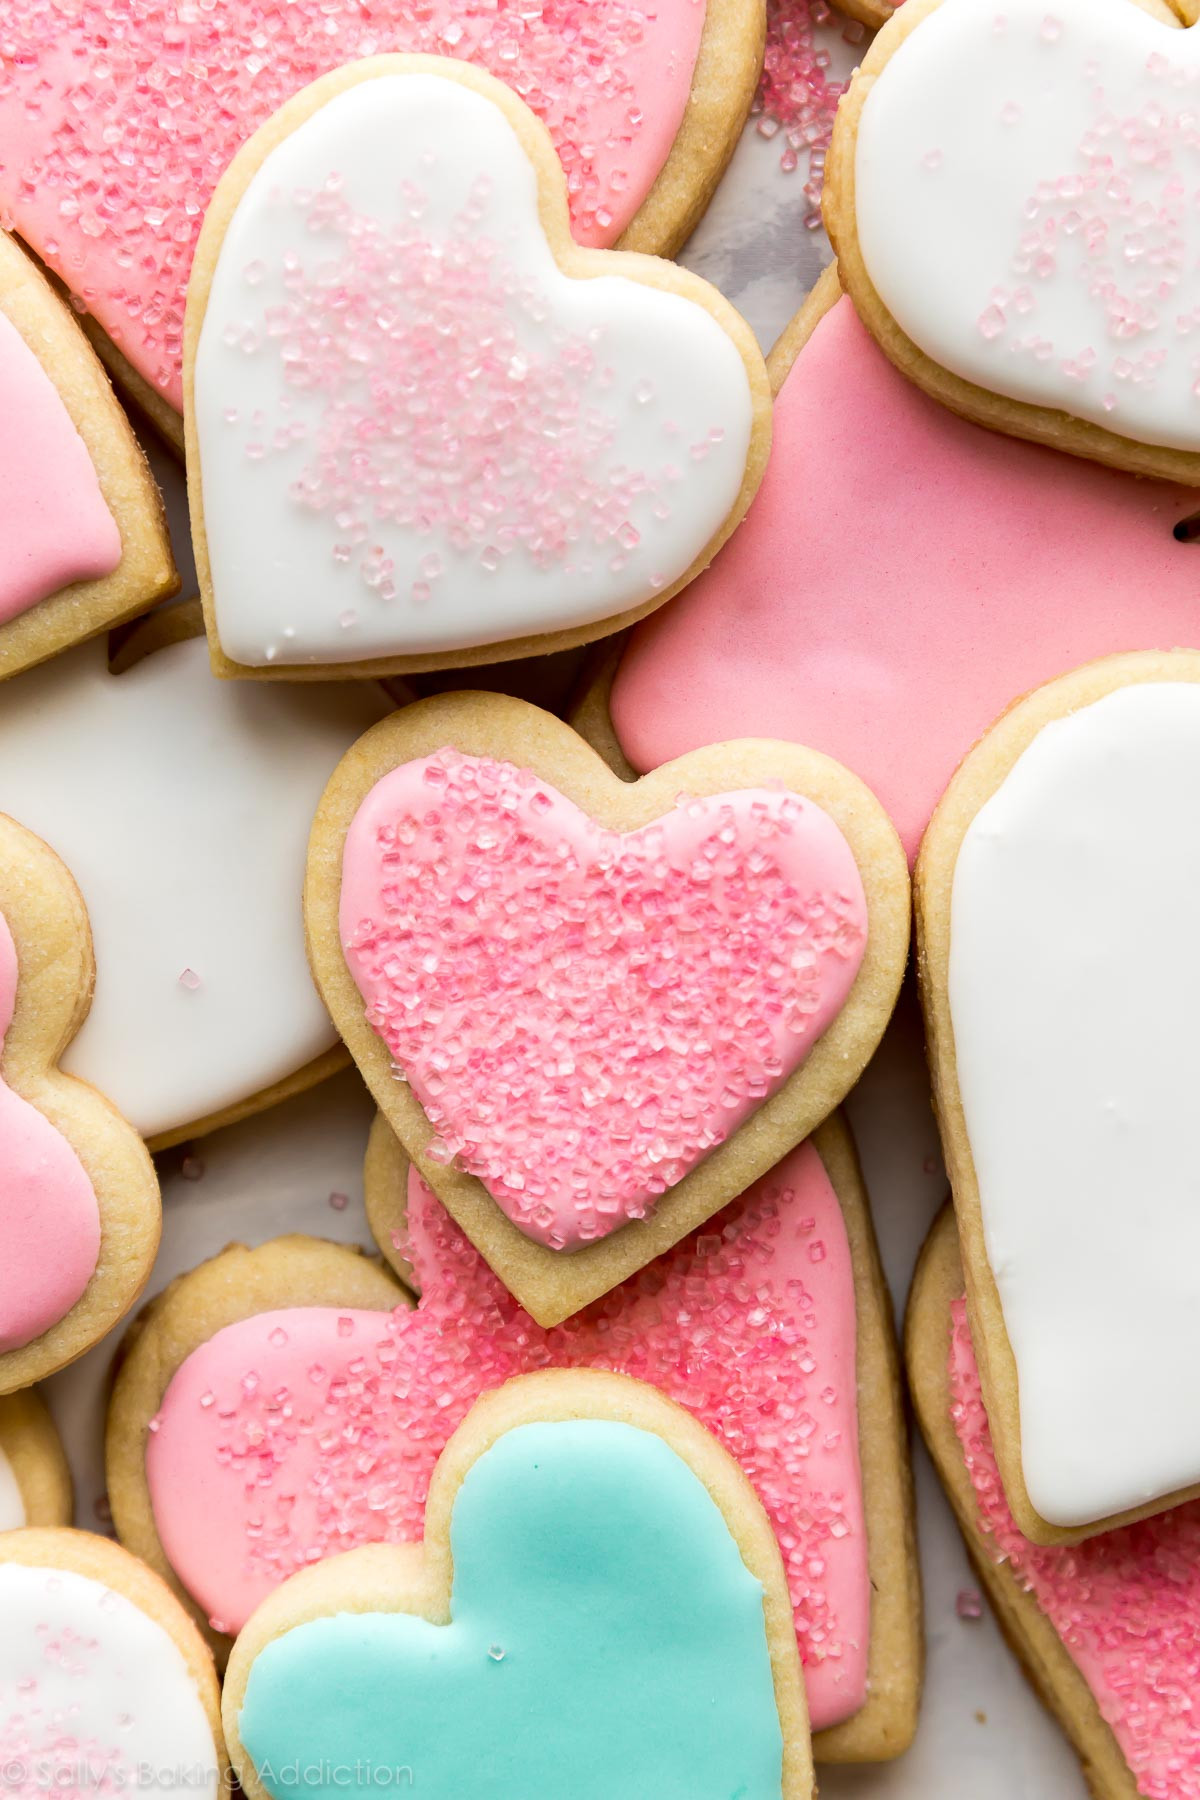 Best Recipes for Sallys Baking Addiction Sugar Cookies